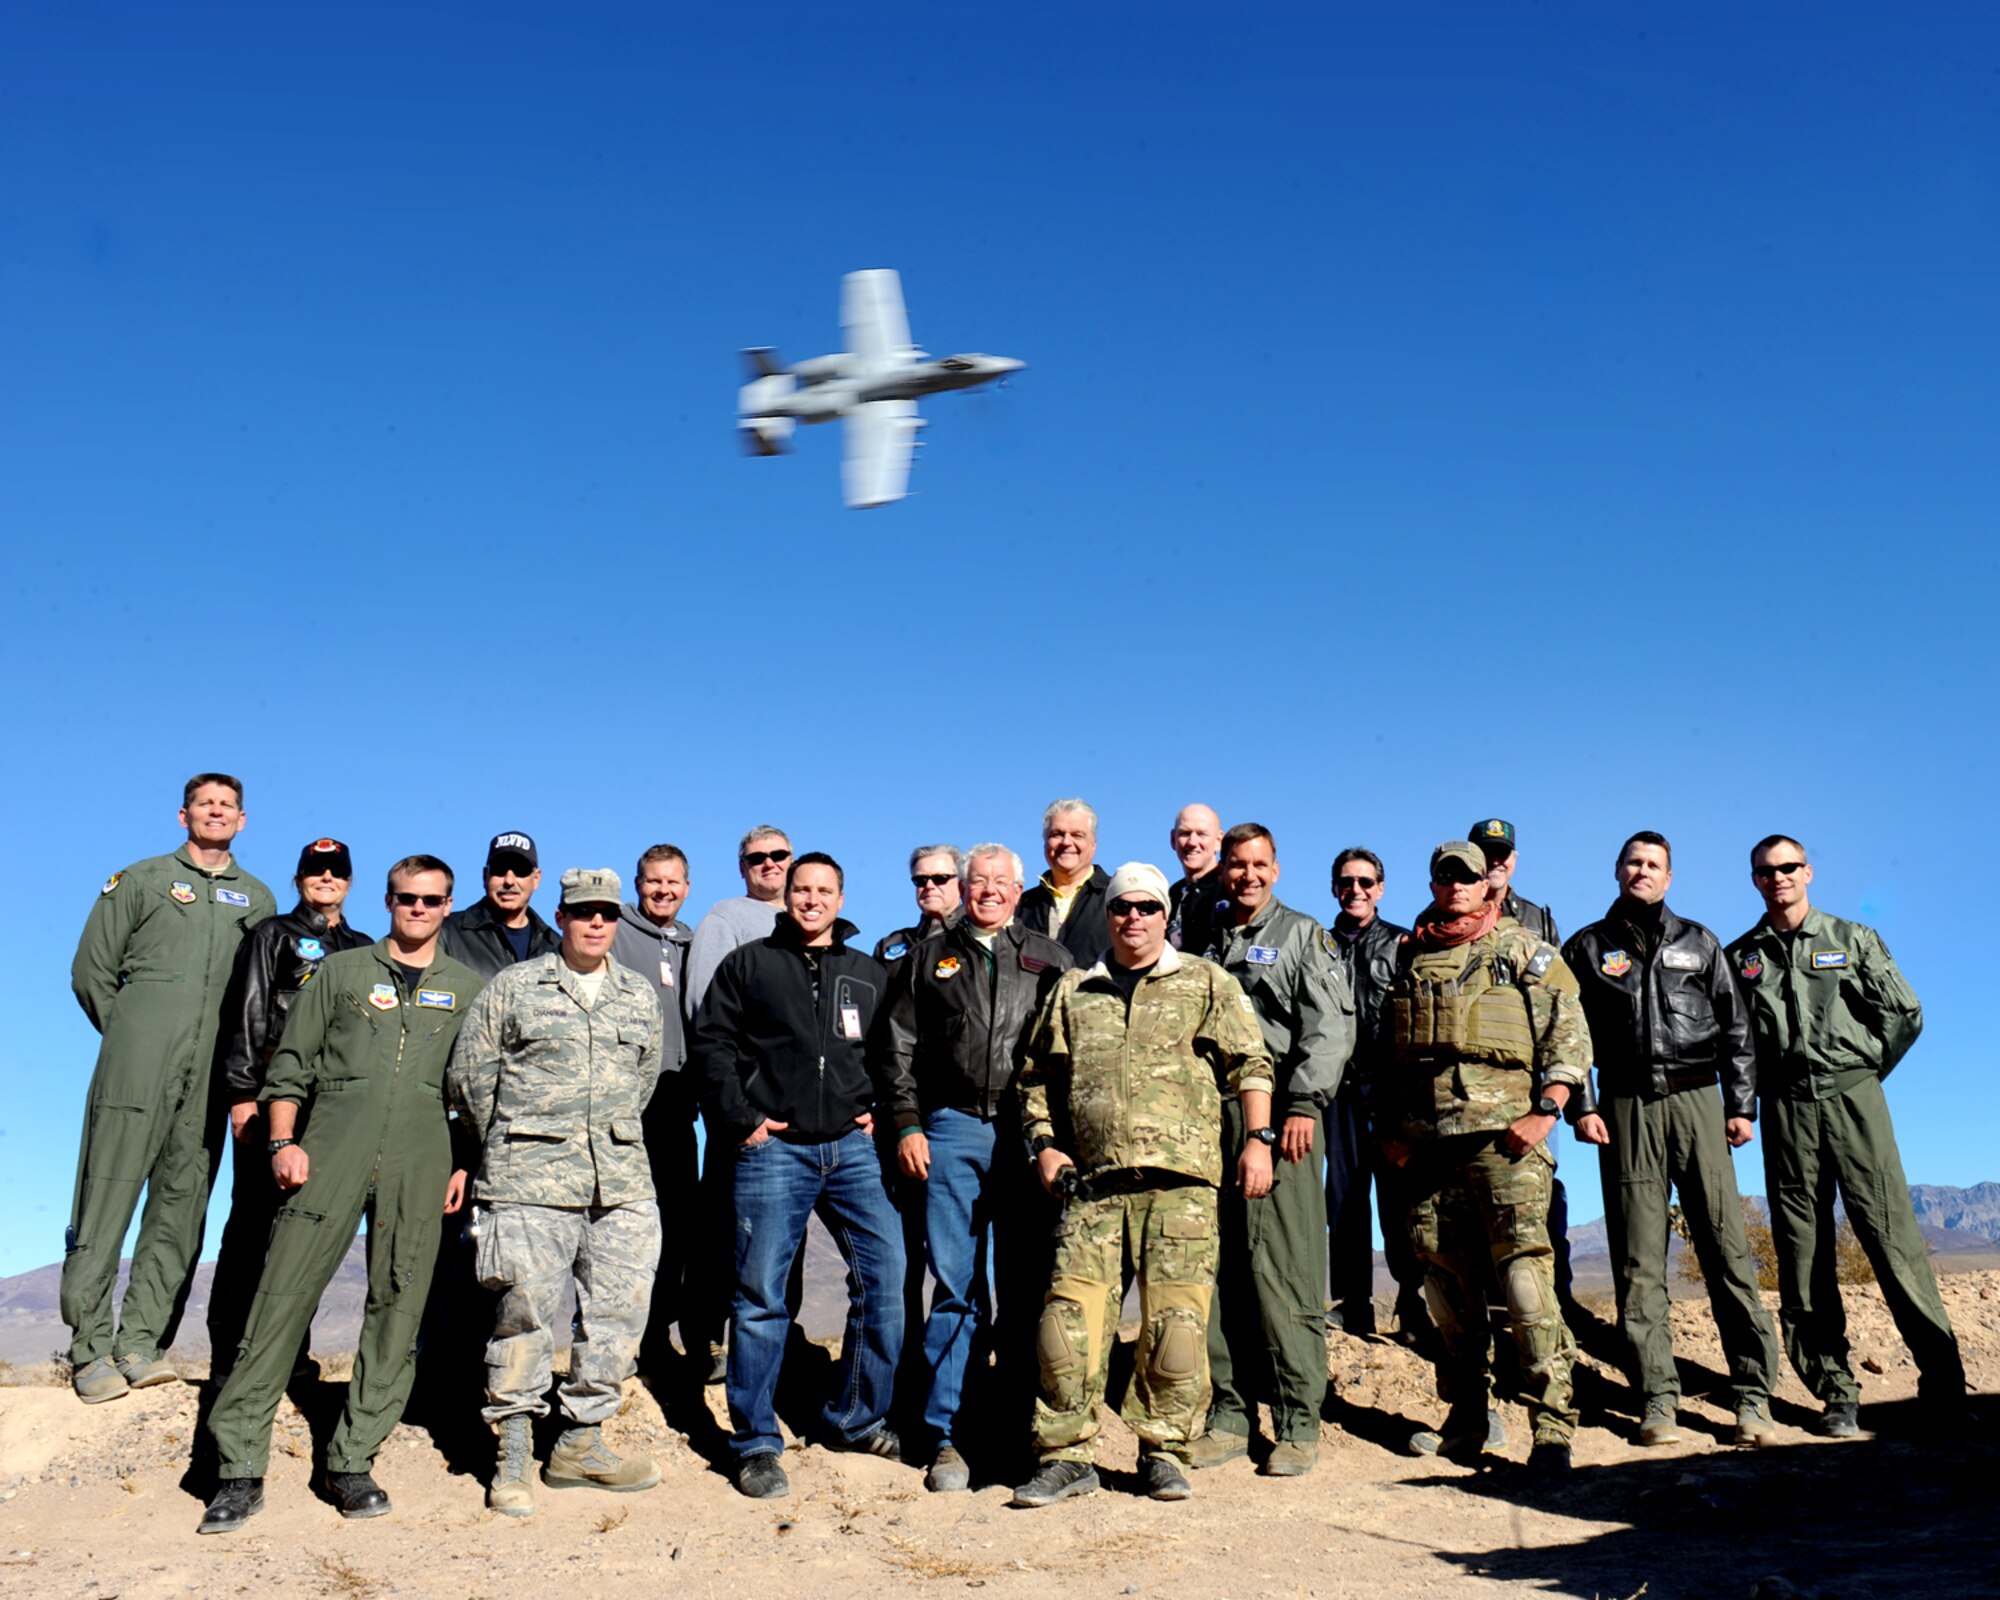 NELLIS AIR FORCE BASE, Nev. – Members of the Nellis Support Team and local elected officials pose with Nellis leadership for a group photo on the Nevada Test and Training Range Nov. 22. The Nellis Support Team and their guests visited the Nevada Test and Training Range so they could see some of the daily training Nellis conducts on the range, which varies from the GCTS to target practice for our A-10s. (U.S. Air Force photo by Jamie Nicley)